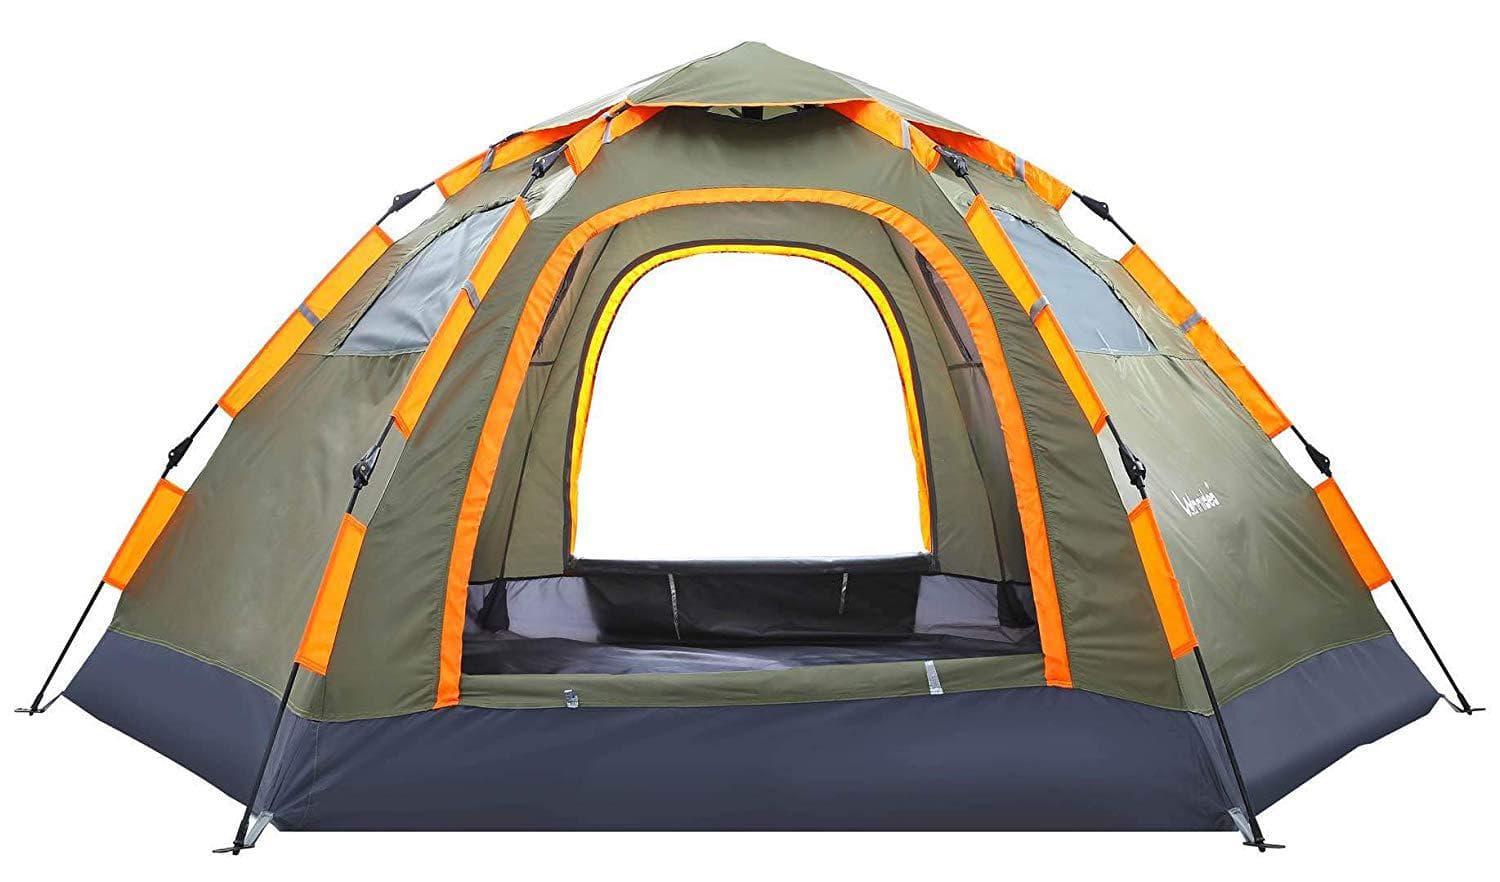 Best Up Tents > Large Reviewed & Compared!